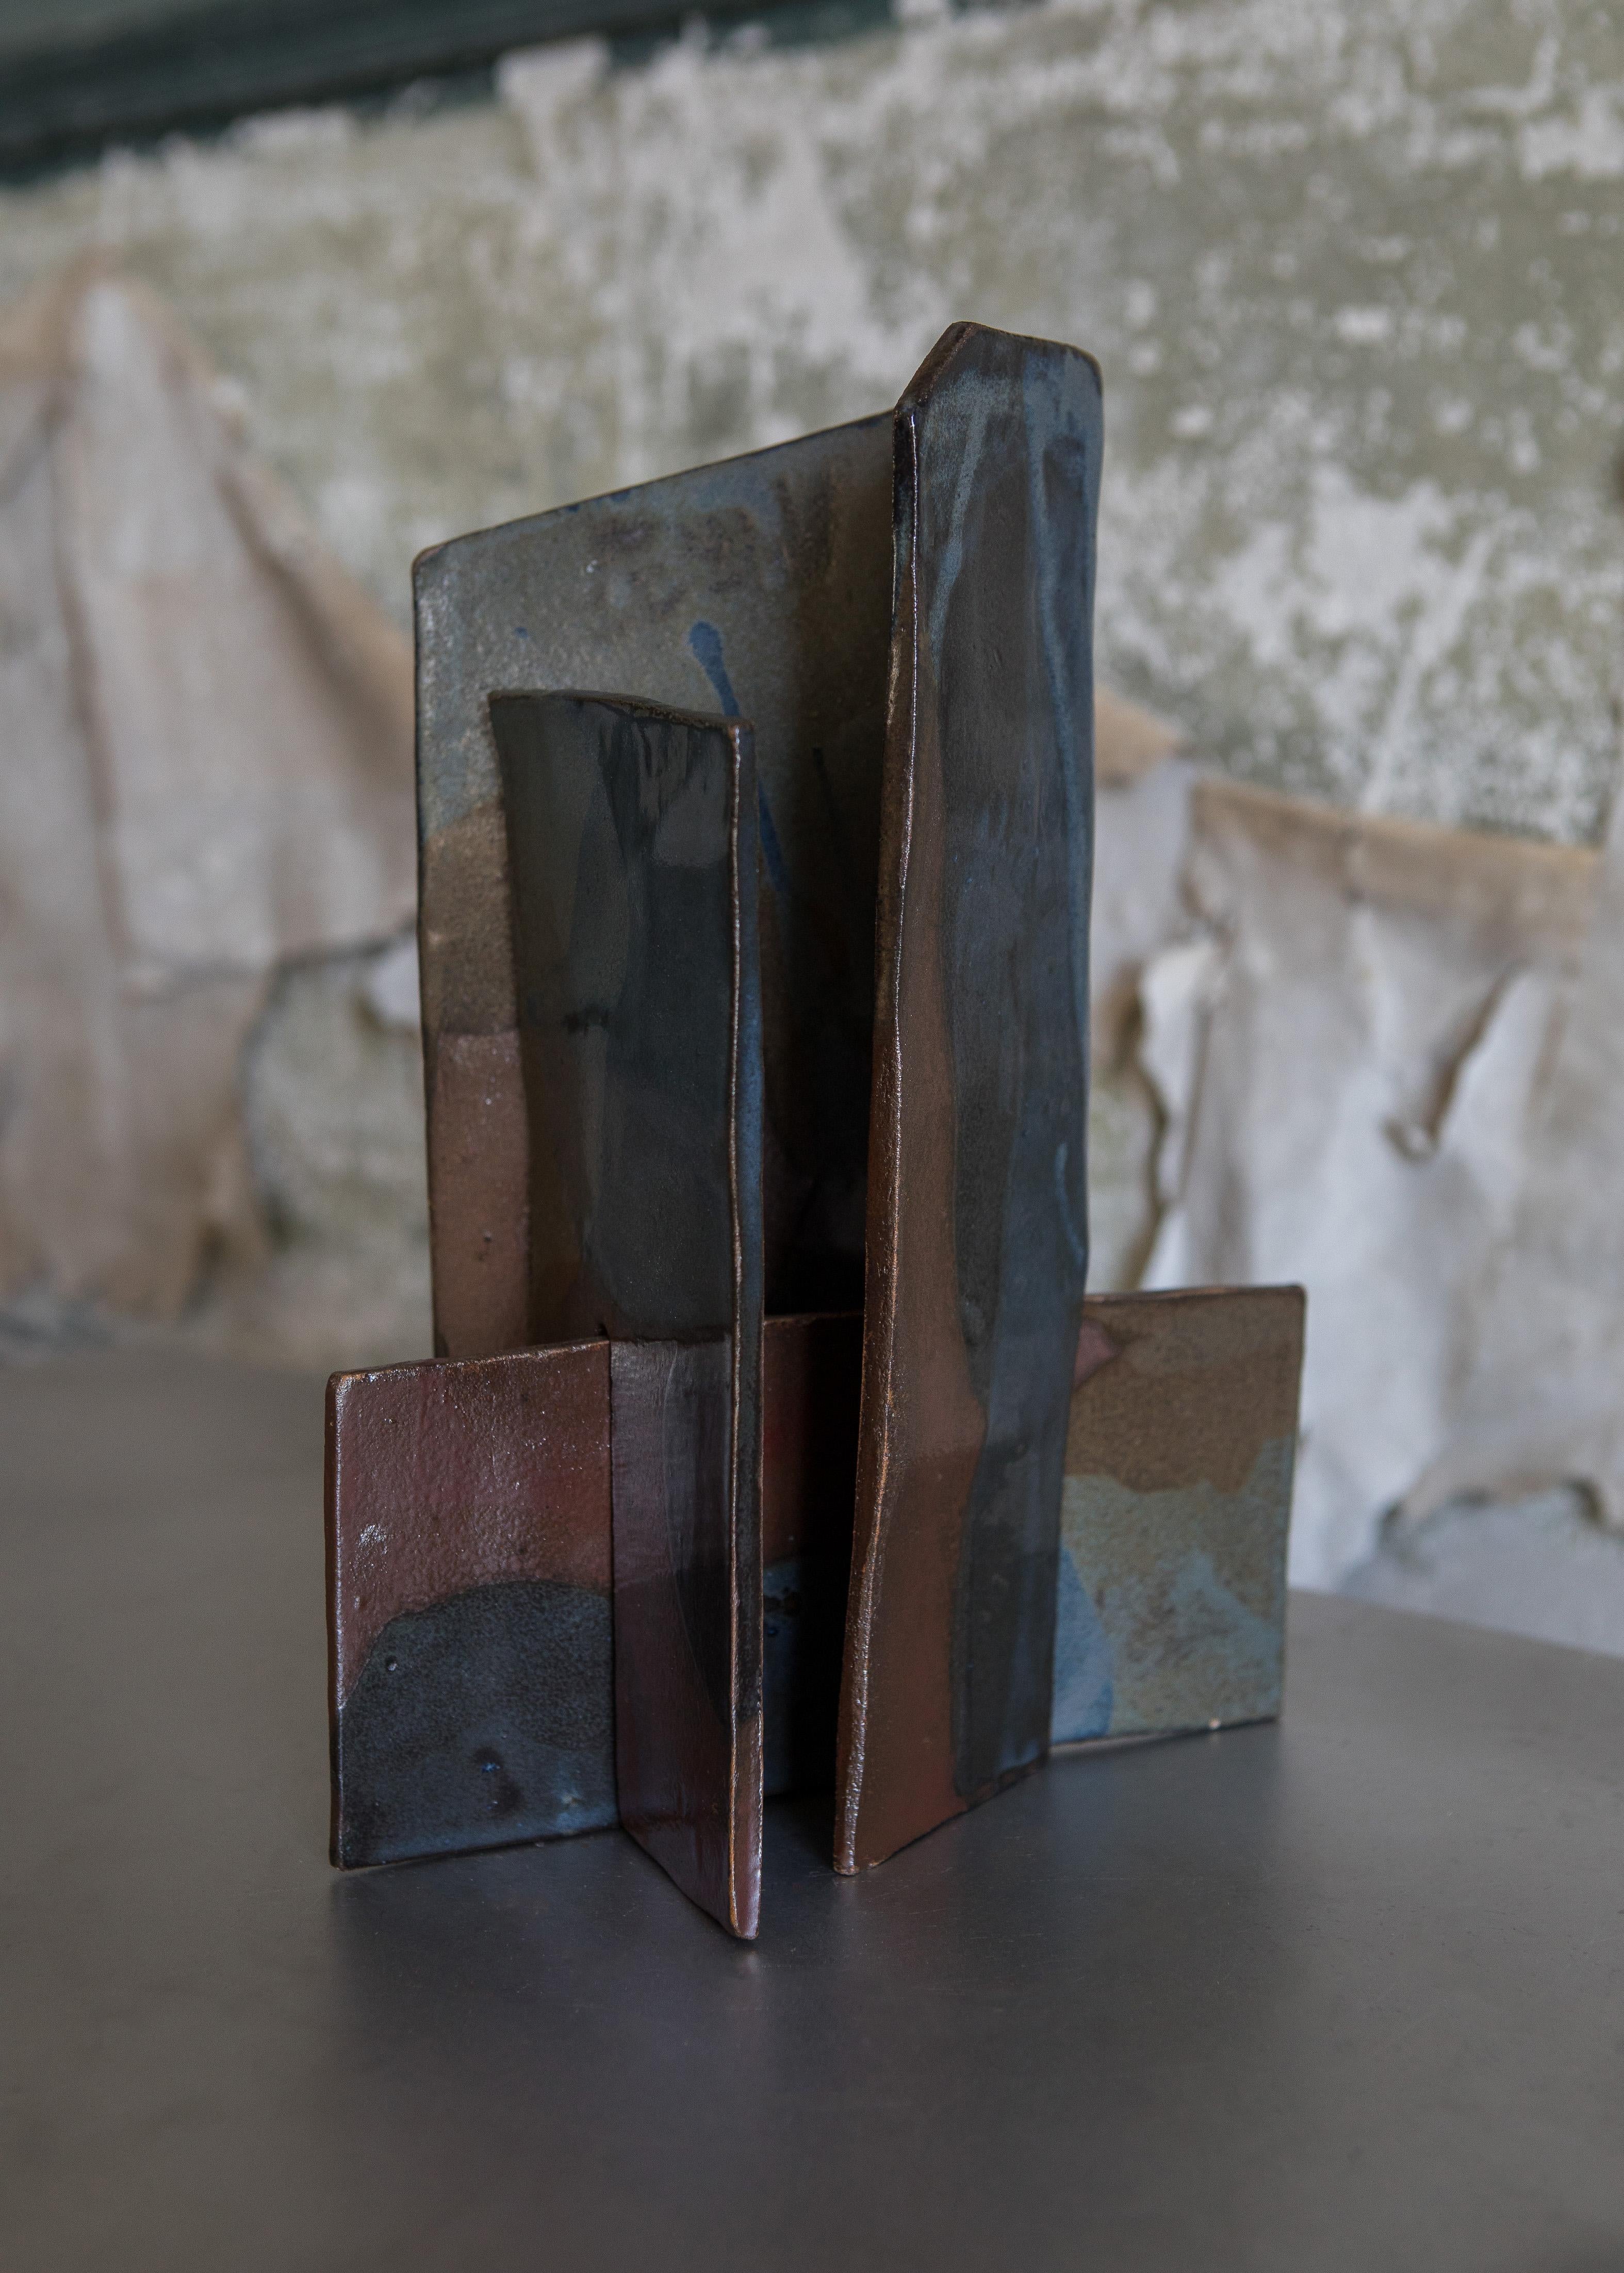 Set Of 3 Sandstone M Decorative Objects by Mylene Niedzialkowski
Unique Pieces.
Dimensions: Ø 30 x H 34,5 cm. 
Materials: Sandstone and enamel.

Modules composed of 2 or 3 glazed stoneware slabs, hand- crafted piece by piece to create a unique